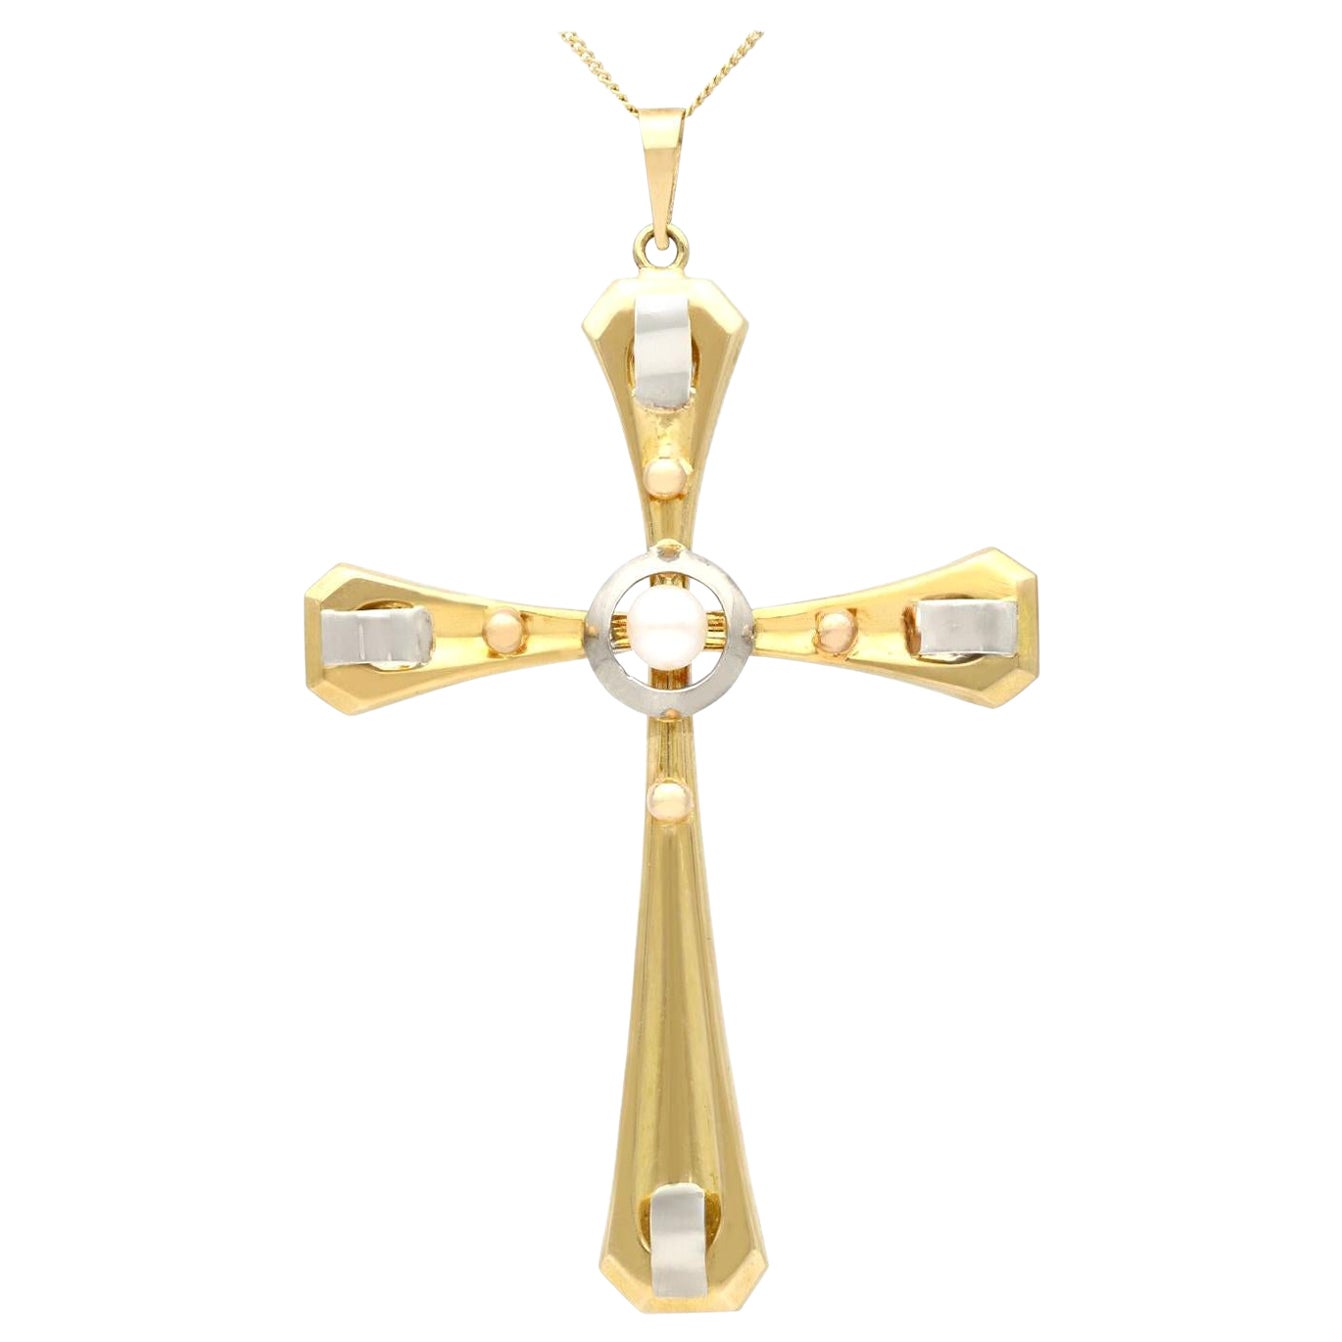 1940s Seed Pearl and Yellow Gold Cross Pendant